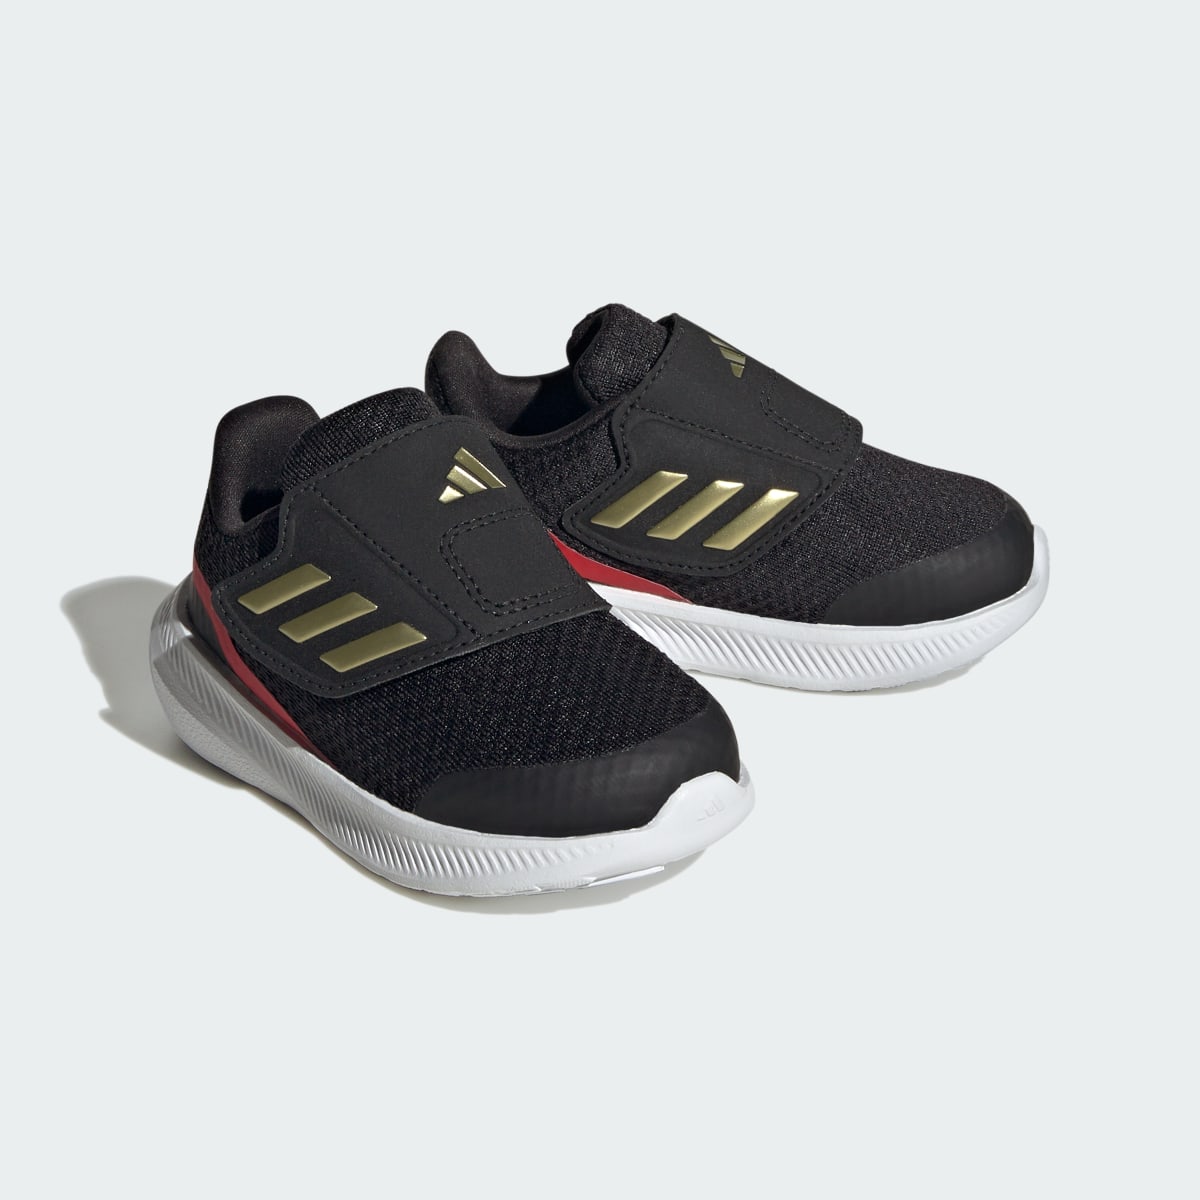 Adidas Runfalcon 3.0 Sport Running Hook-and-Loop Shoes. 5